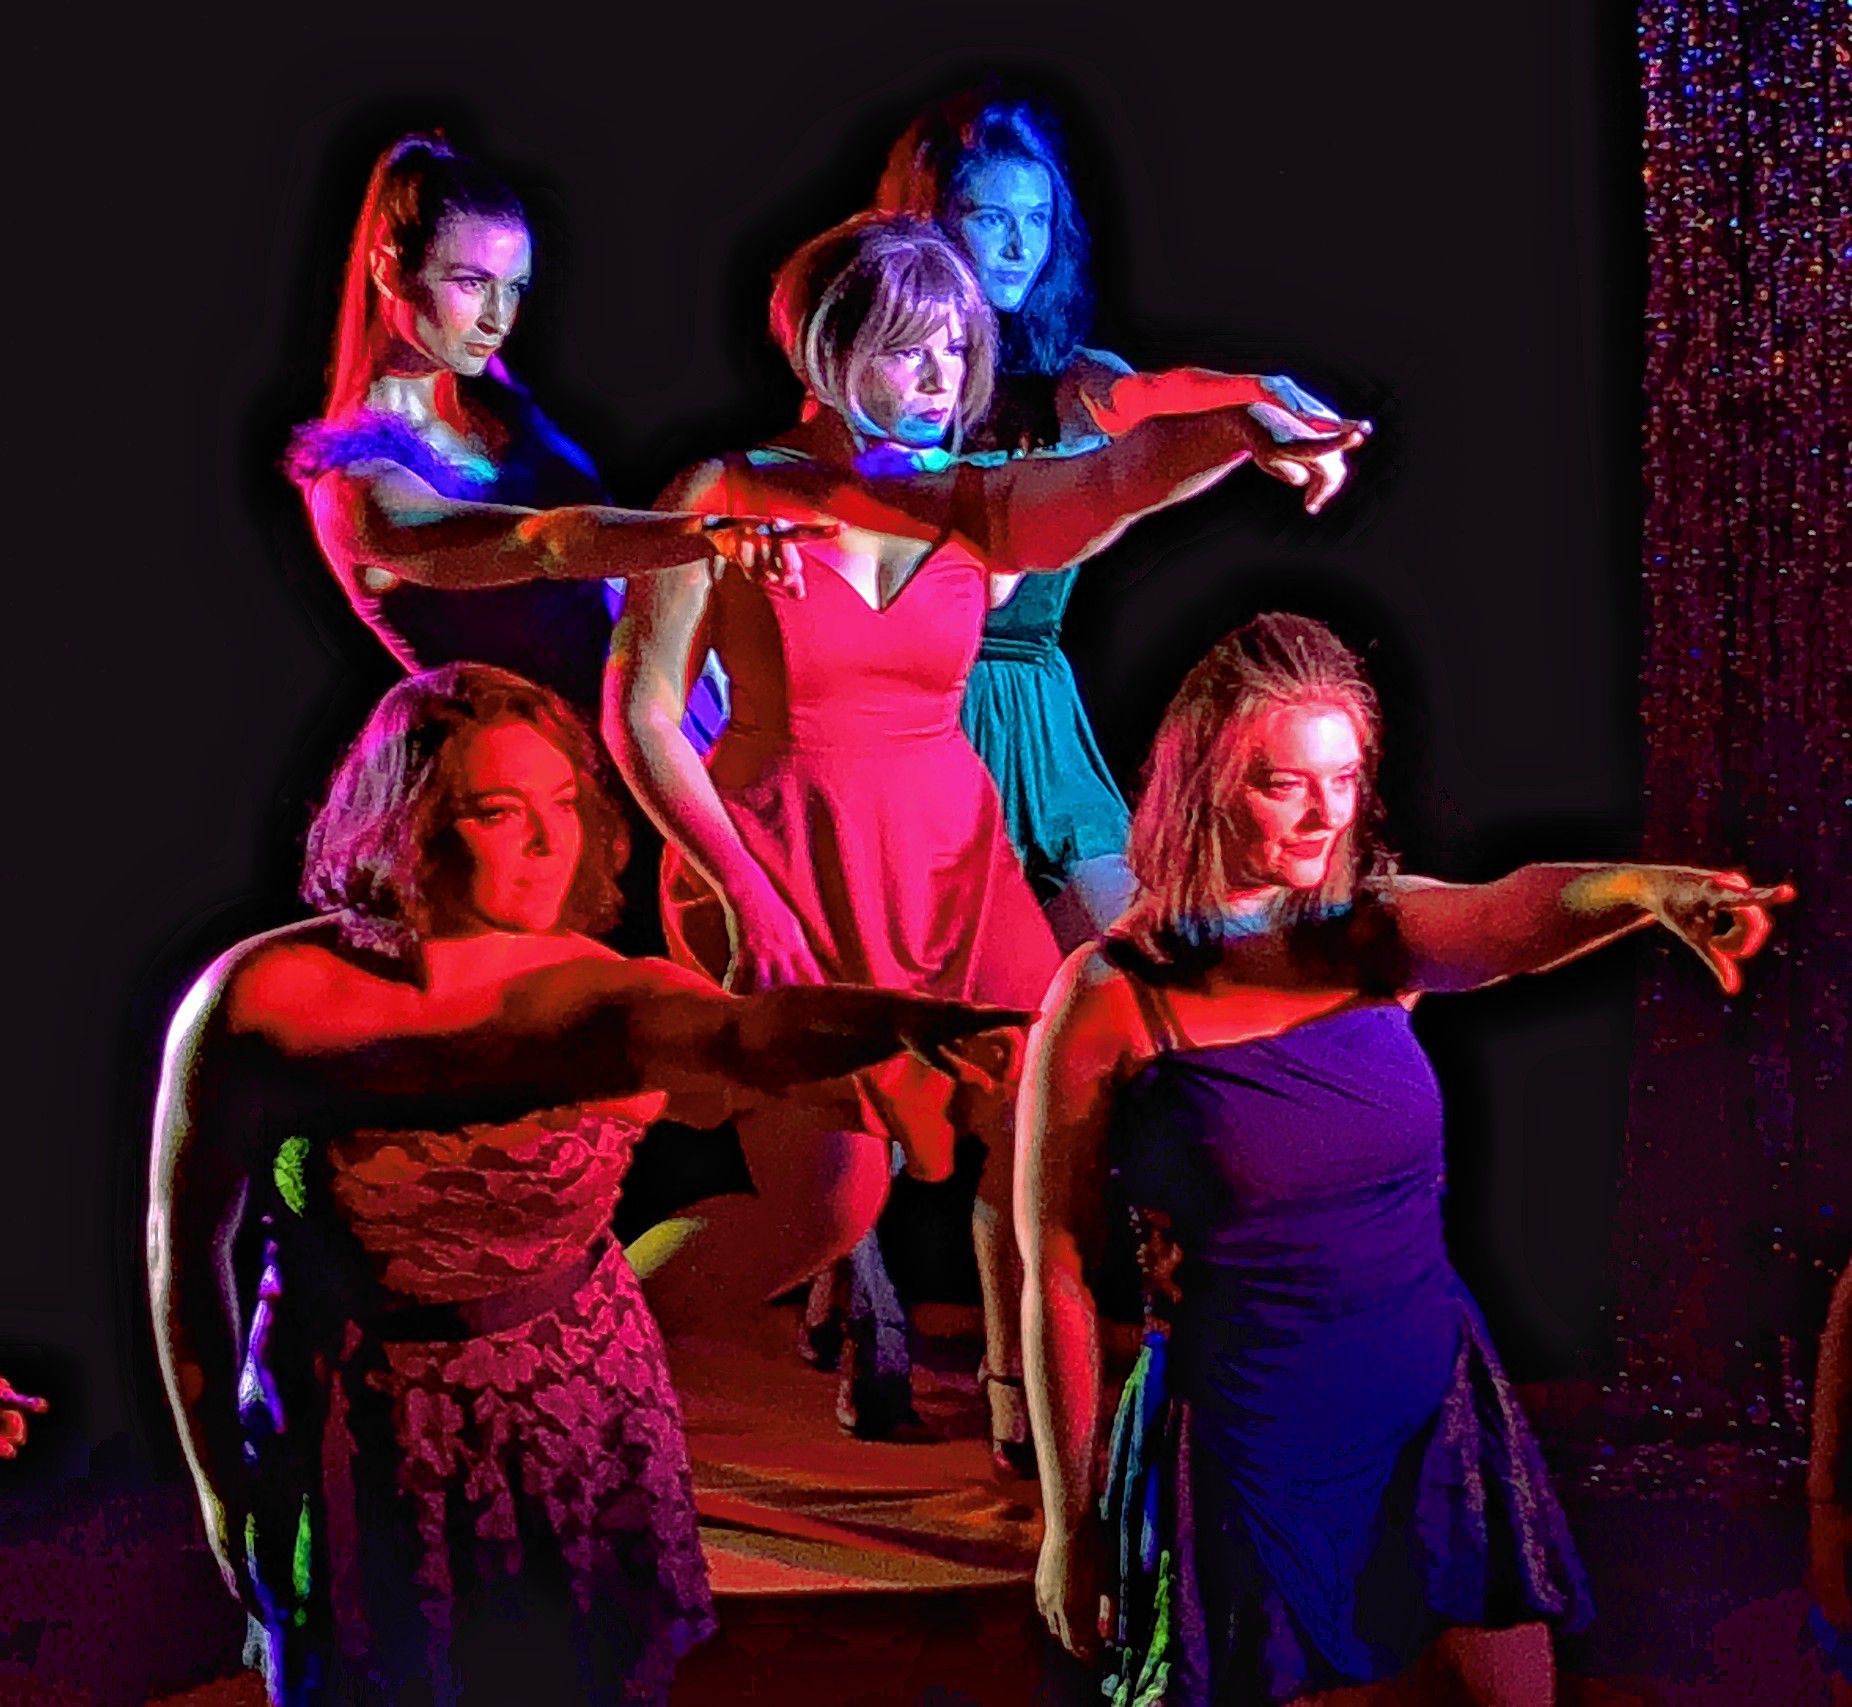 A scene from "Sweet Charity" performed by the Community Players of Concord shows Charity (center) and some of the Fandango Girls.  Courtesy of Community Players of Concord